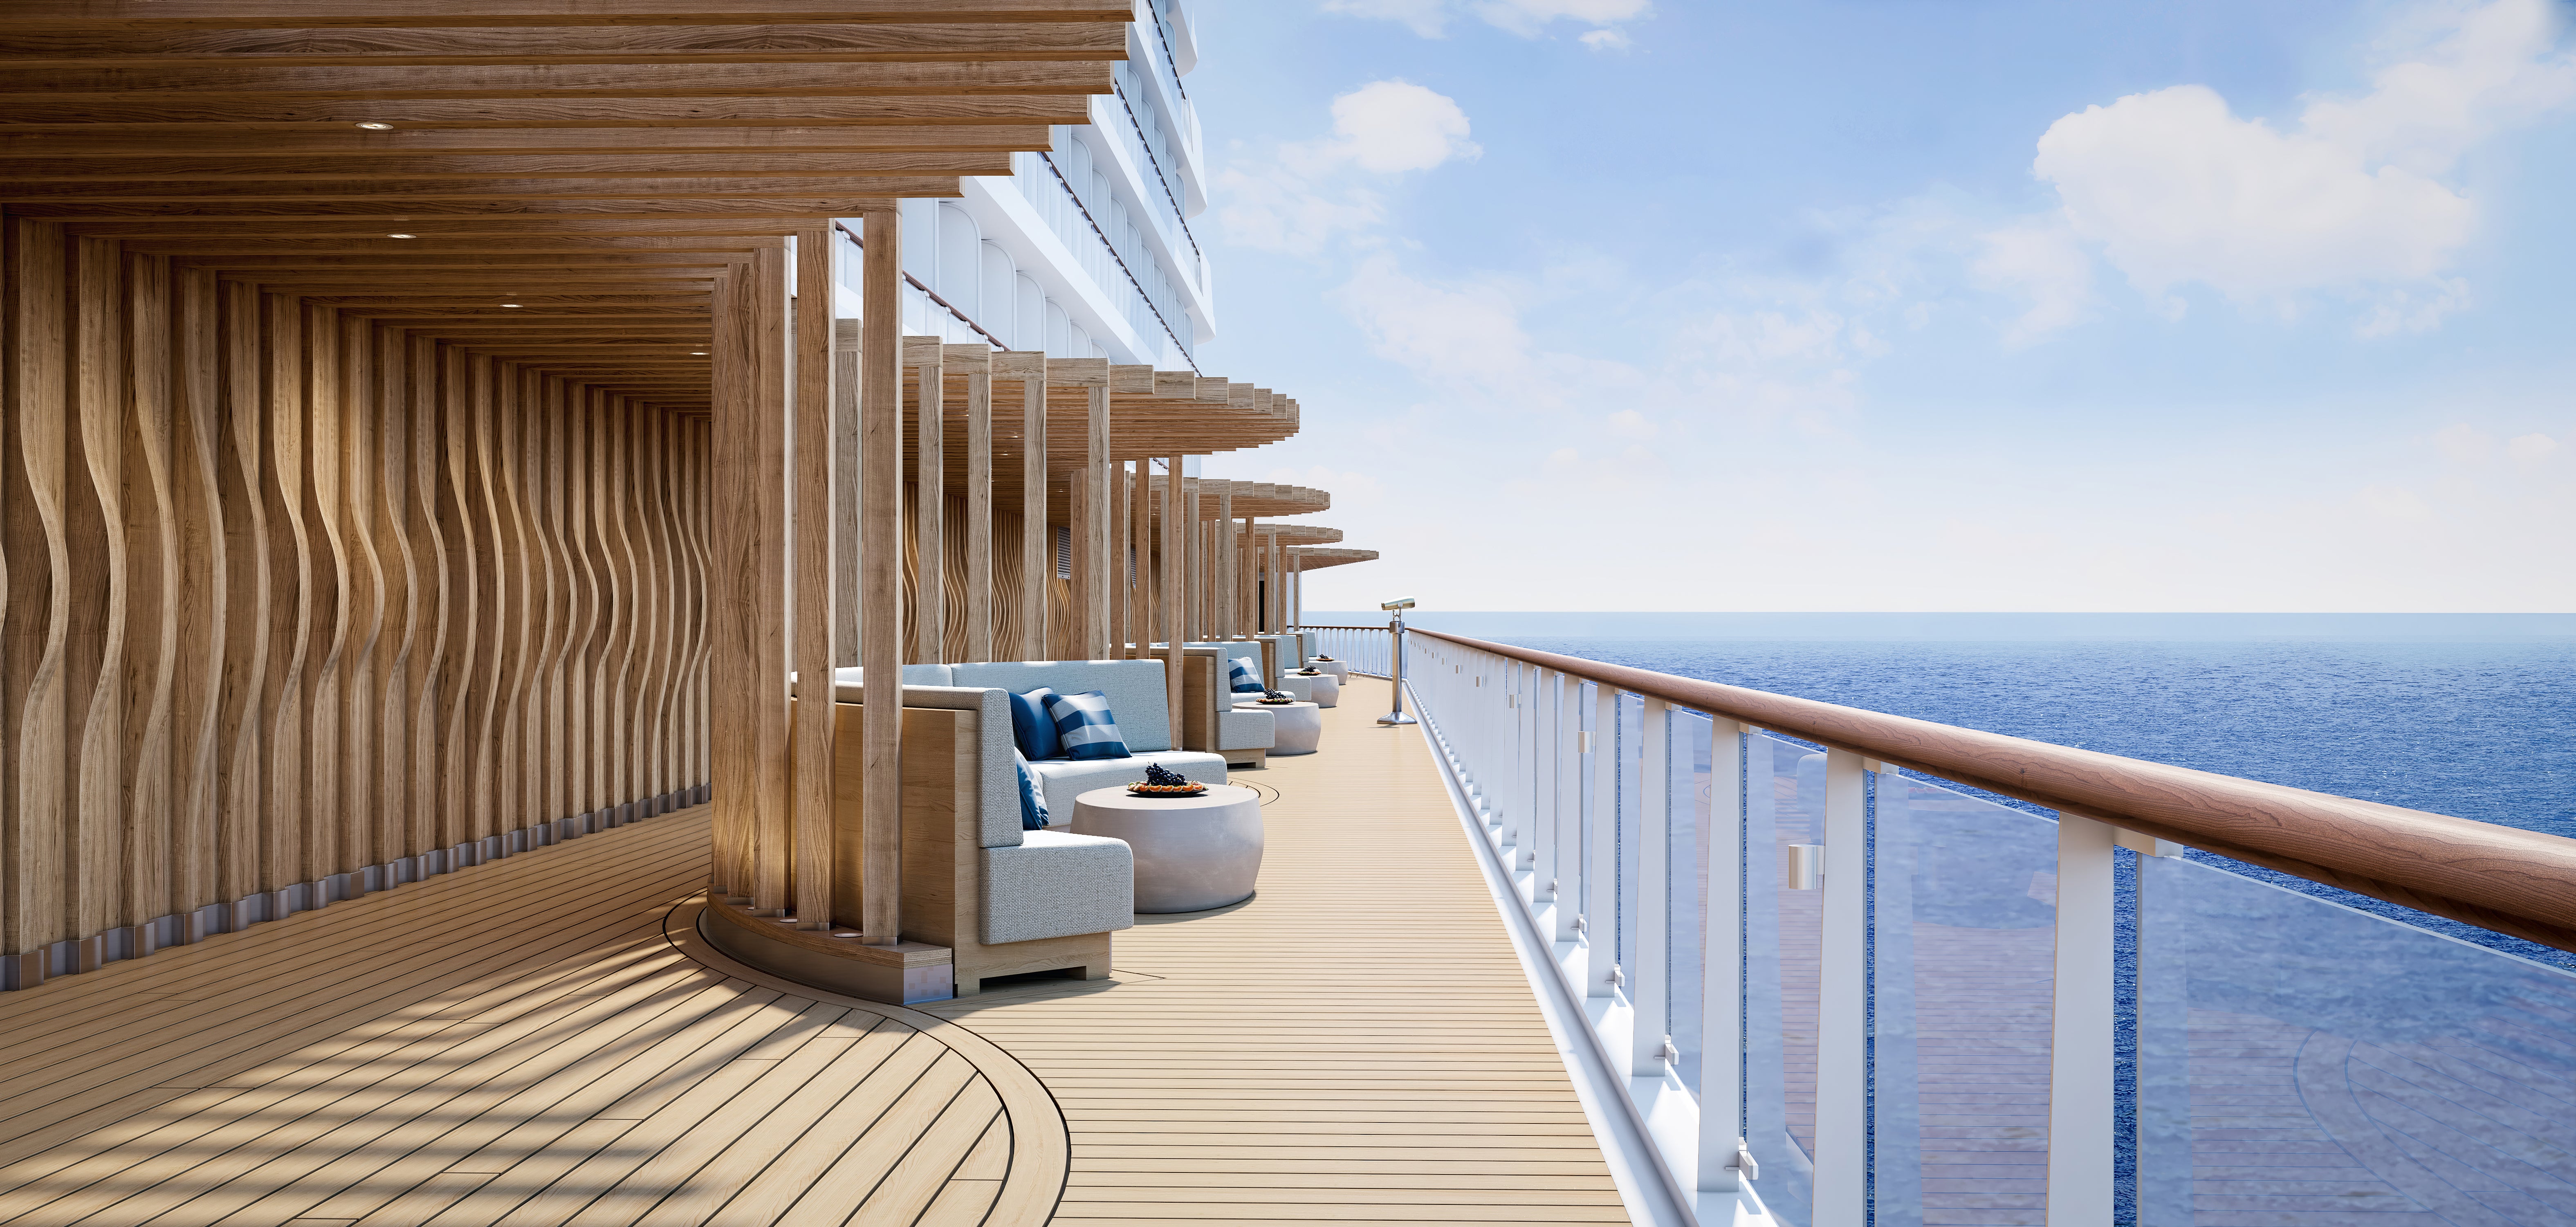 The Prima has the most outdoor deck space of any new cruise ship